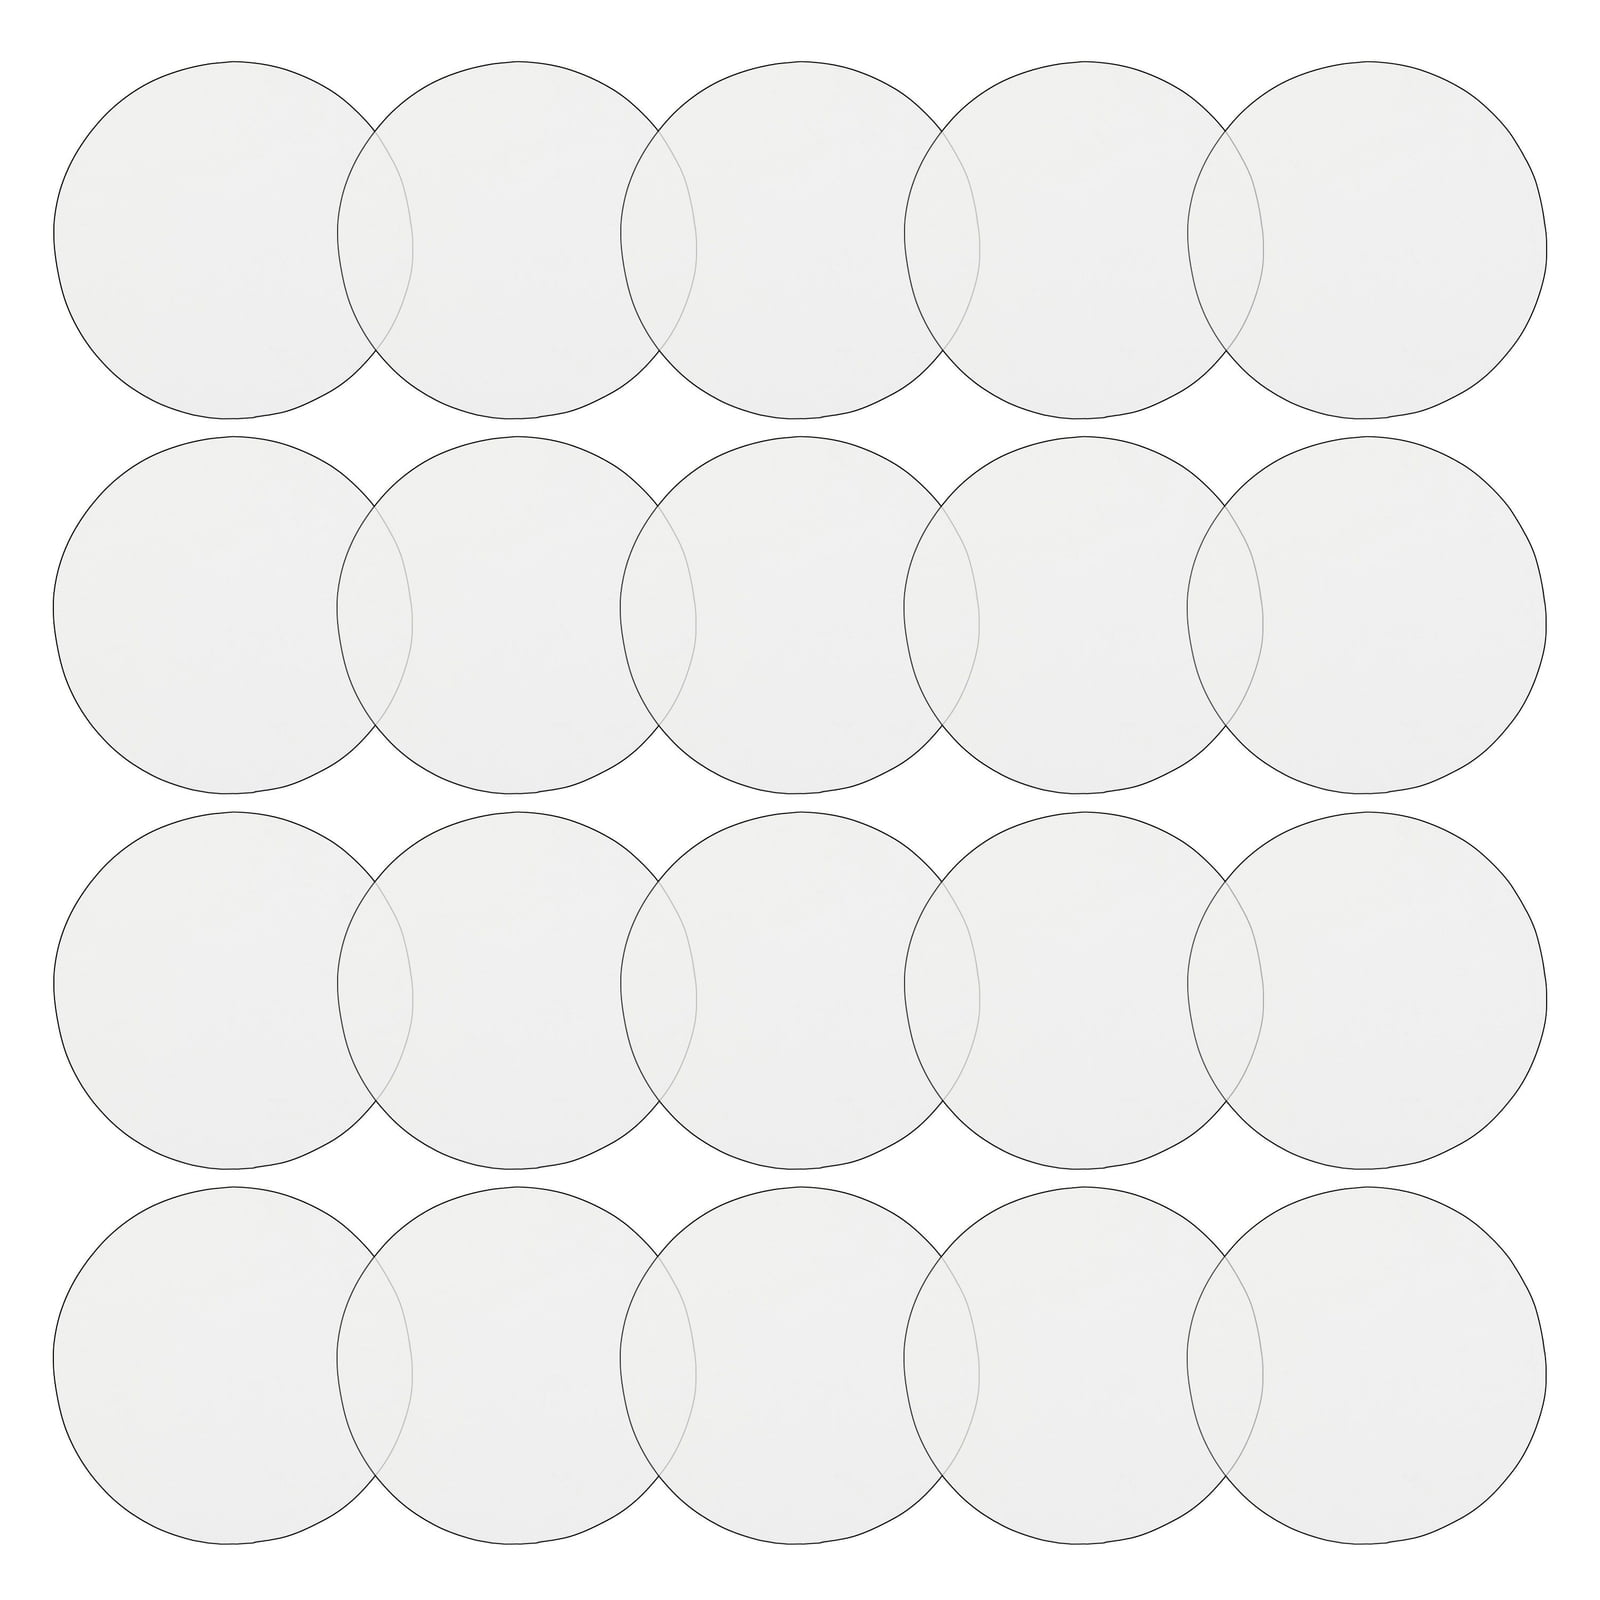 KastLite 1 Clear Acrylic Discs Pack | 1/8 Thick Transparent Blanks for  DIY Arts & Craft Projects | Pack of 10